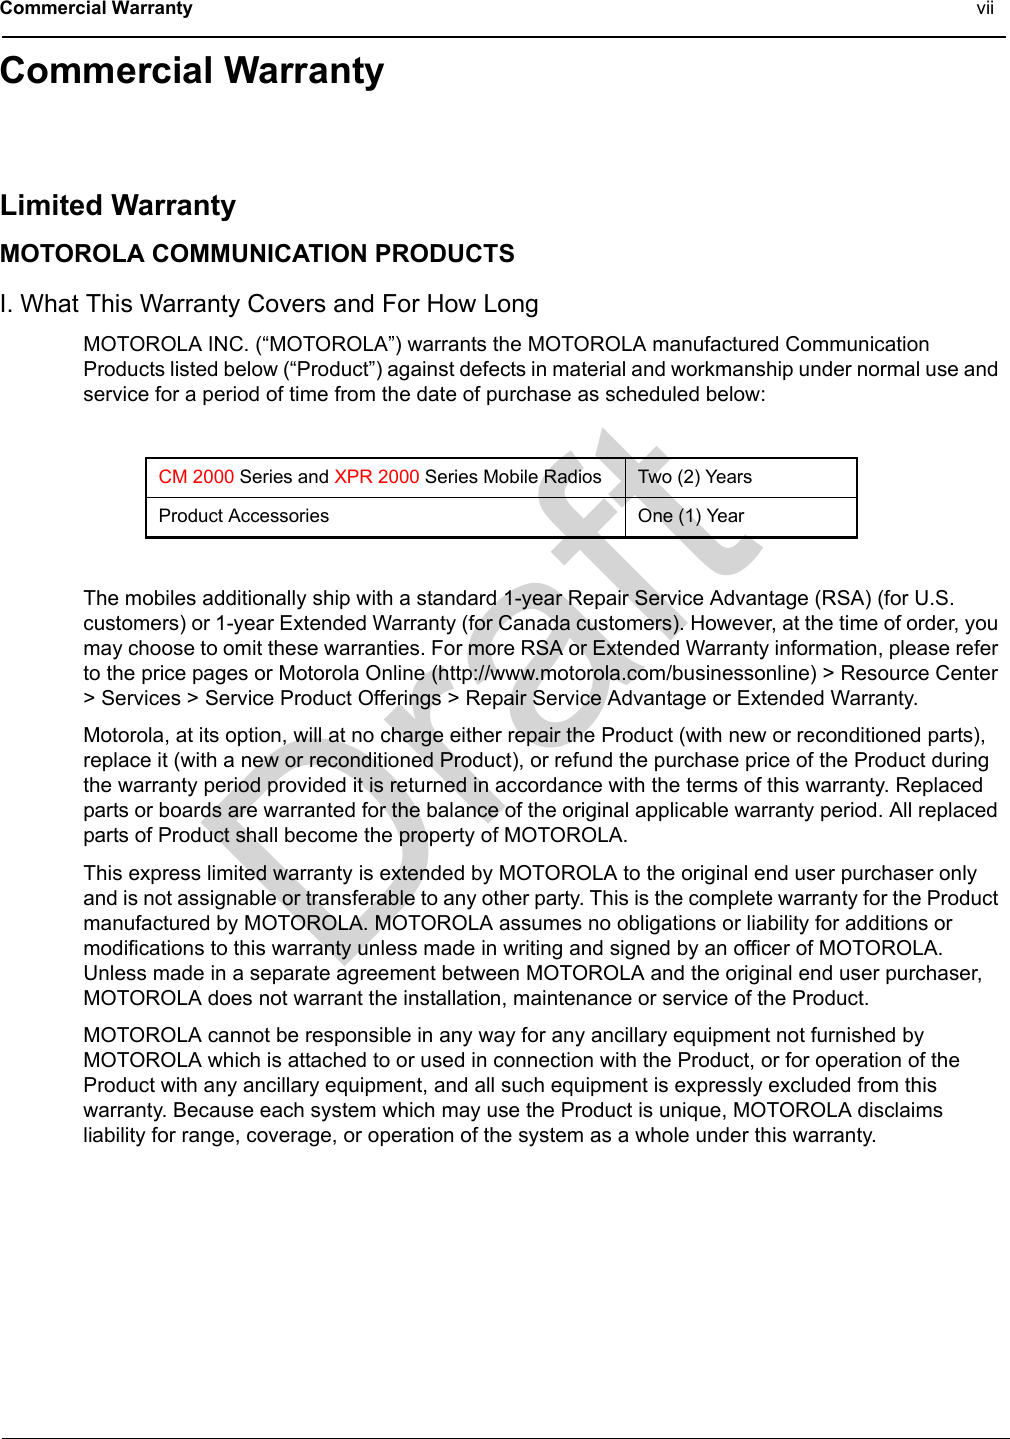 DraftCommercial Warranty viiCommercial WarrantyLimited WarrantyMOTOROLA COMMUNICATION PRODUCTSI. What This Warranty Covers and For How LongMOTOROLA INC. (“MOTOROLA”) warrants the MOTOROLA manufactured Communication Products listed below (“Product”) against defects in material and workmanship under normal use and service for a period of time from the date of purchase as scheduled below:The mobiles additionally ship with a standard 1-year Repair Service Advantage (RSA) (for U.S. customers) or 1-year Extended Warranty (for Canada customers). However, at the time of order, you may choose to omit these warranties. For more RSA or Extended Warranty information, please refer to the price pages or Motorola Online (http://www.motorola.com/businessonline) &gt; Resource Center &gt; Services &gt; Service Product Offerings &gt; Repair Service Advantage or Extended Warranty.Motorola, at its option, will at no charge either repair the Product (with new or reconditioned parts), replace it (with a new or reconditioned Product), or refund the purchase price of the Product during the warranty period provided it is returned in accordance with the terms of this warranty. Replaced parts or boards are warranted for the balance of the original applicable warranty period. All replaced parts of Product shall become the property of MOTOROLA.This express limited warranty is extended by MOTOROLA to the original end user purchaser only and is not assignable or transferable to any other party. This is the complete warranty for the Product manufactured by MOTOROLA. MOTOROLA assumes no obligations or liability for additions or modifications to this warranty unless made in writing and signed by an officer of MOTOROLA. Unless made in a separate agreement between MOTOROLA and the original end user purchaser, MOTOROLA does not warrant the installation, maintenance or service of the Product.MOTOROLA cannot be responsible in any way for any ancillary equipment not furnished by MOTOROLA which is attached to or used in connection with the Product, or for operation of the Product with any ancillary equipment, and all such equipment is expressly excluded from this warranty. Because each system which may use the Product is unique, MOTOROLA disclaims liability for range, coverage, or operation of the system as a whole under this warranty.CM 2000 Series and XPR 2000 Series Mobile Radios Two (2) YearsProduct Accessories One (1) Year